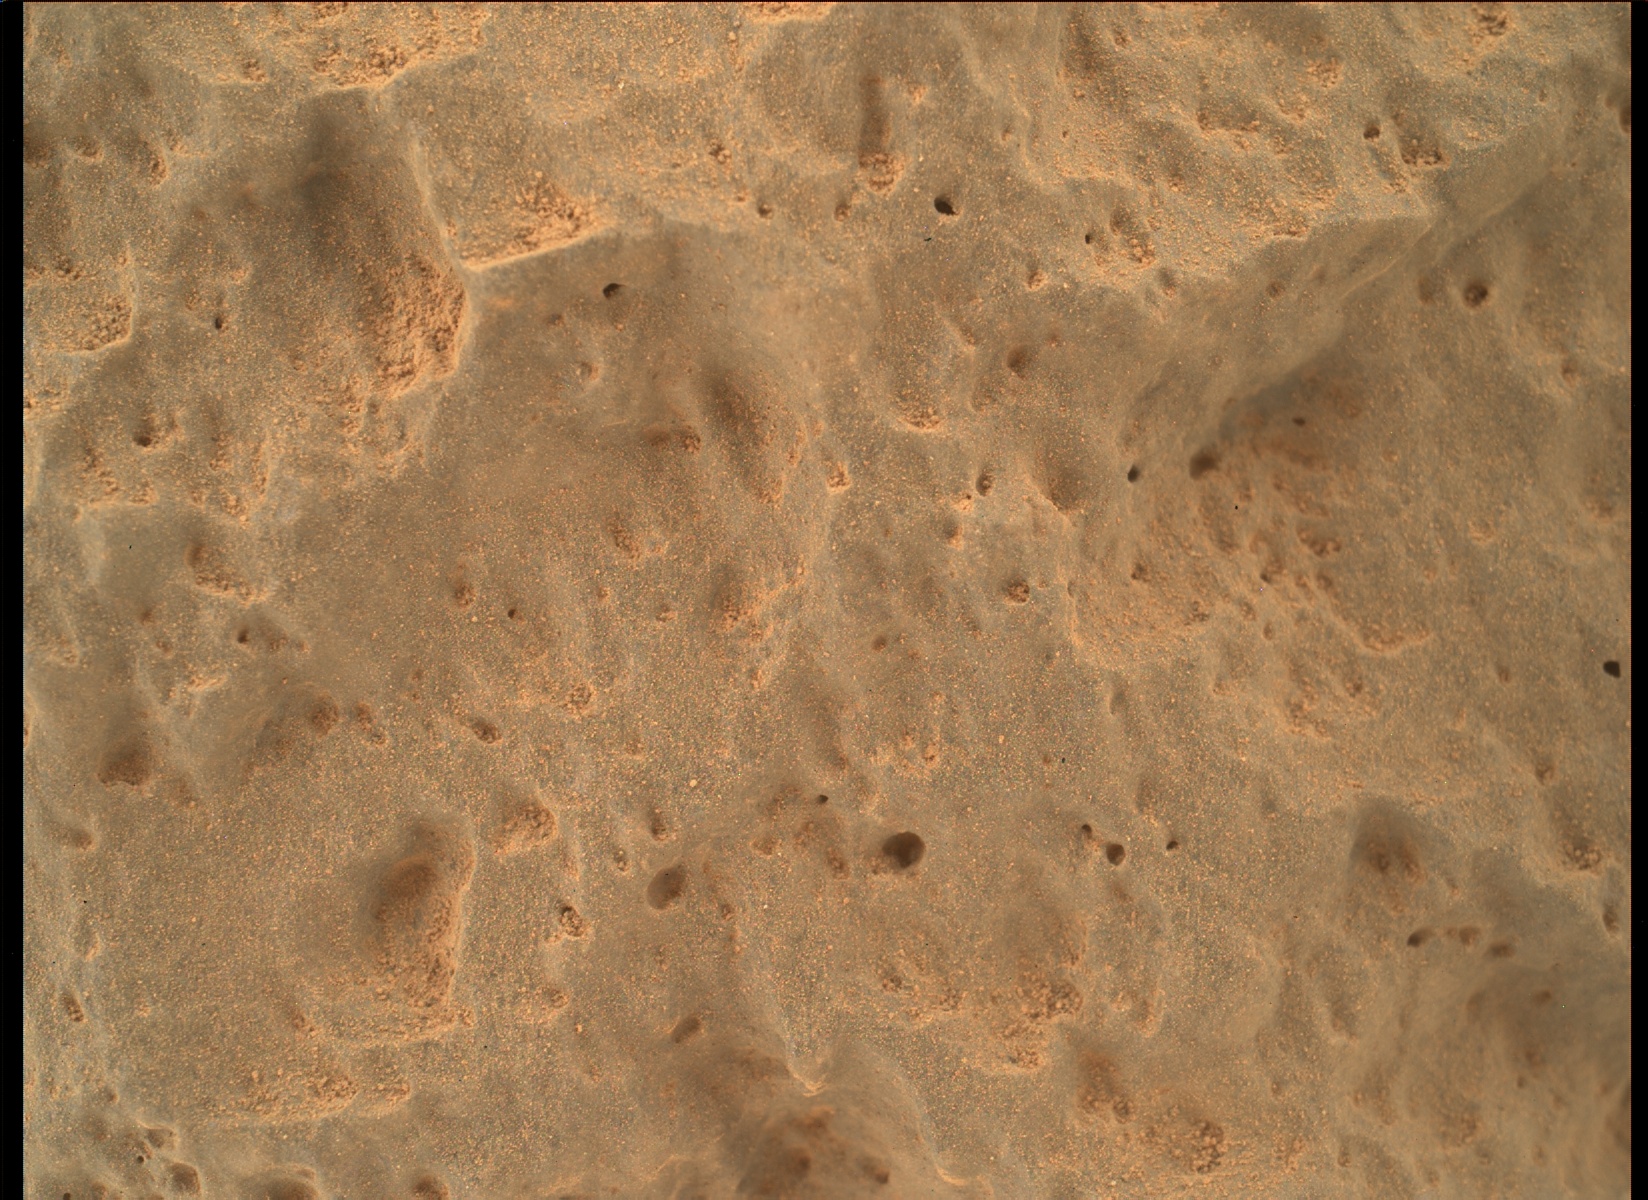 Nasa's Mars rover Curiosity acquired this image using its Mars Hand Lens Imager (MAHLI) on Sol 47